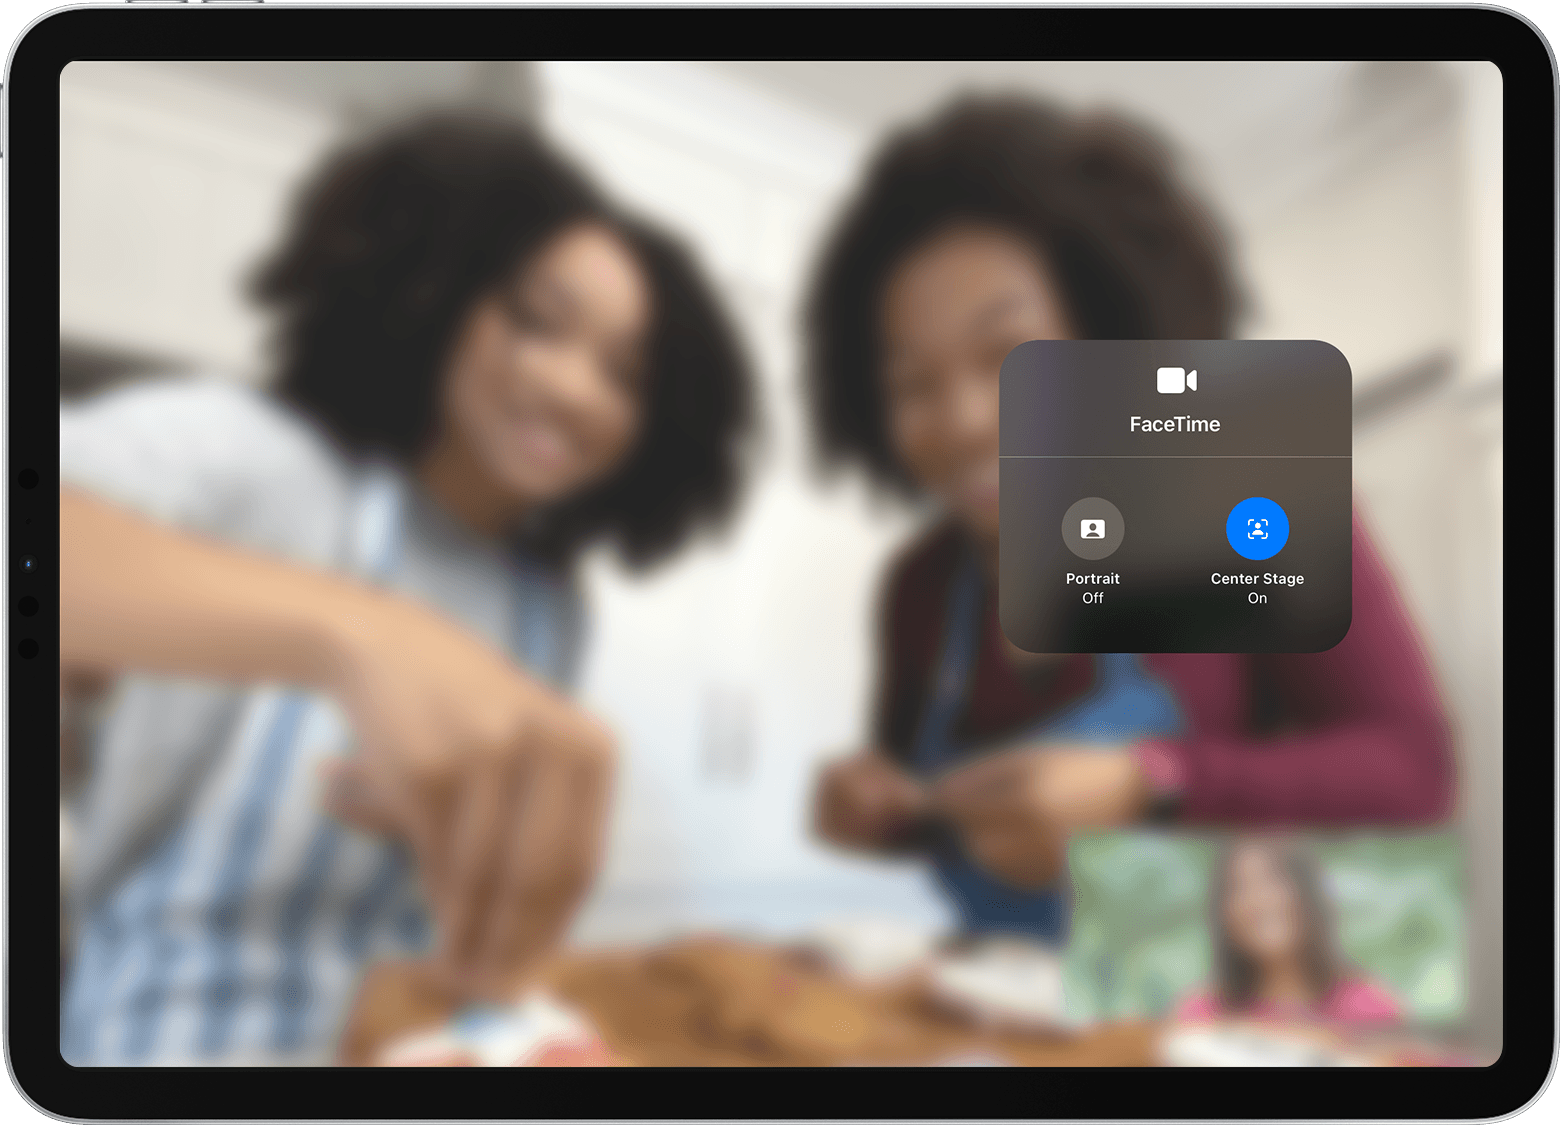 iPad screen shows a FaceTime call with the Video Effects options visible